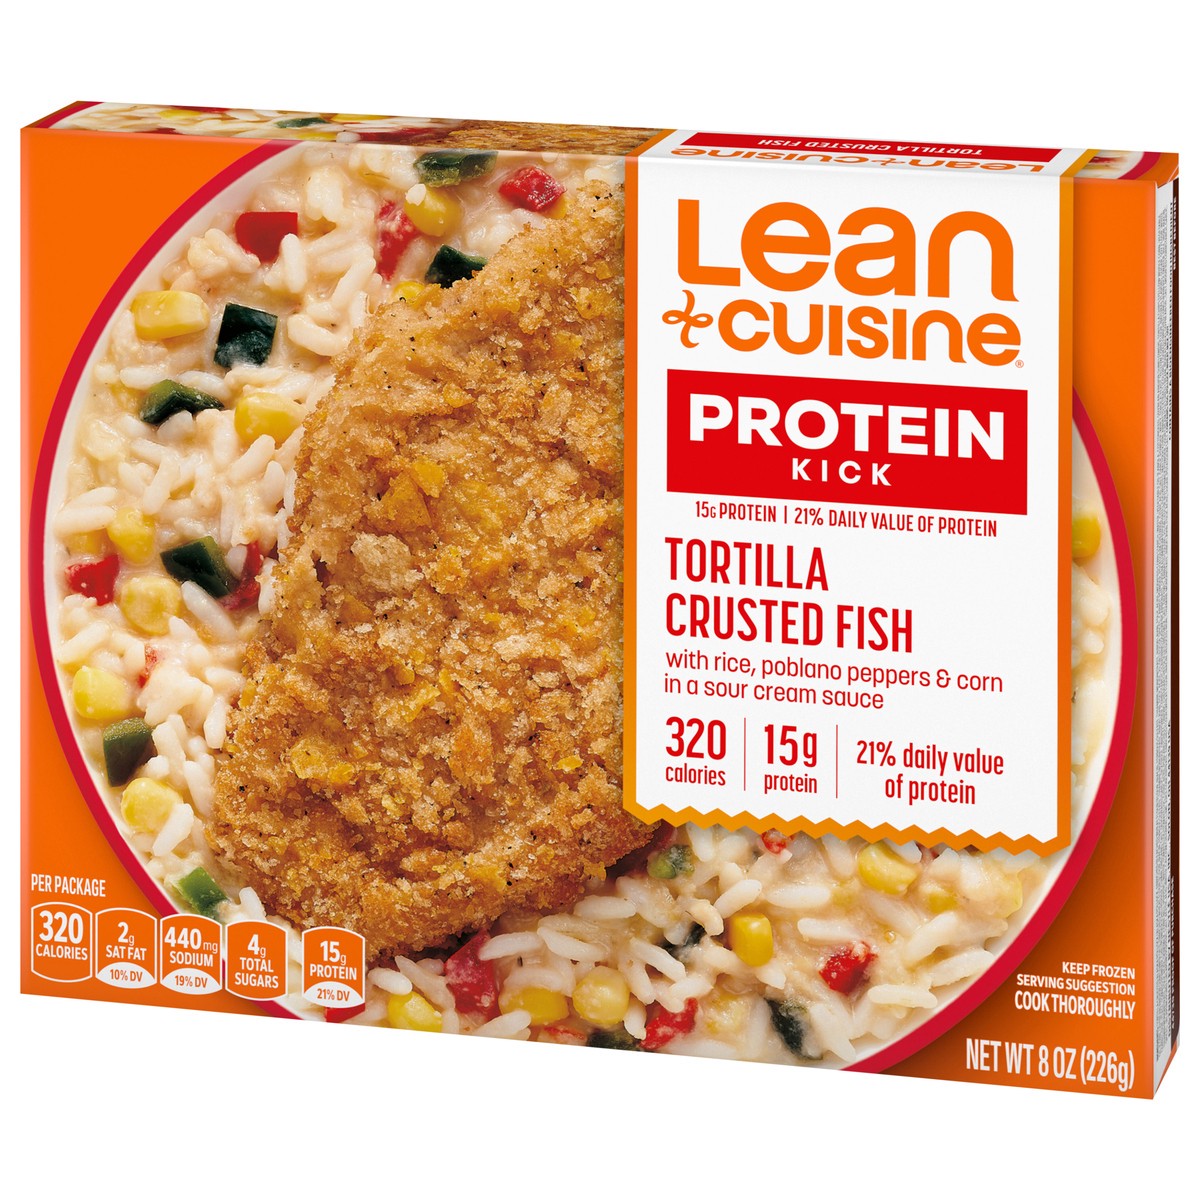 slide 3 of 9, Lean Cuisine Frozen Meal Tortilla Crusted Fish, Protein Kick Microwave Meal, Microwave Fish Dinner, Frozen Dinner for One, 8 oz